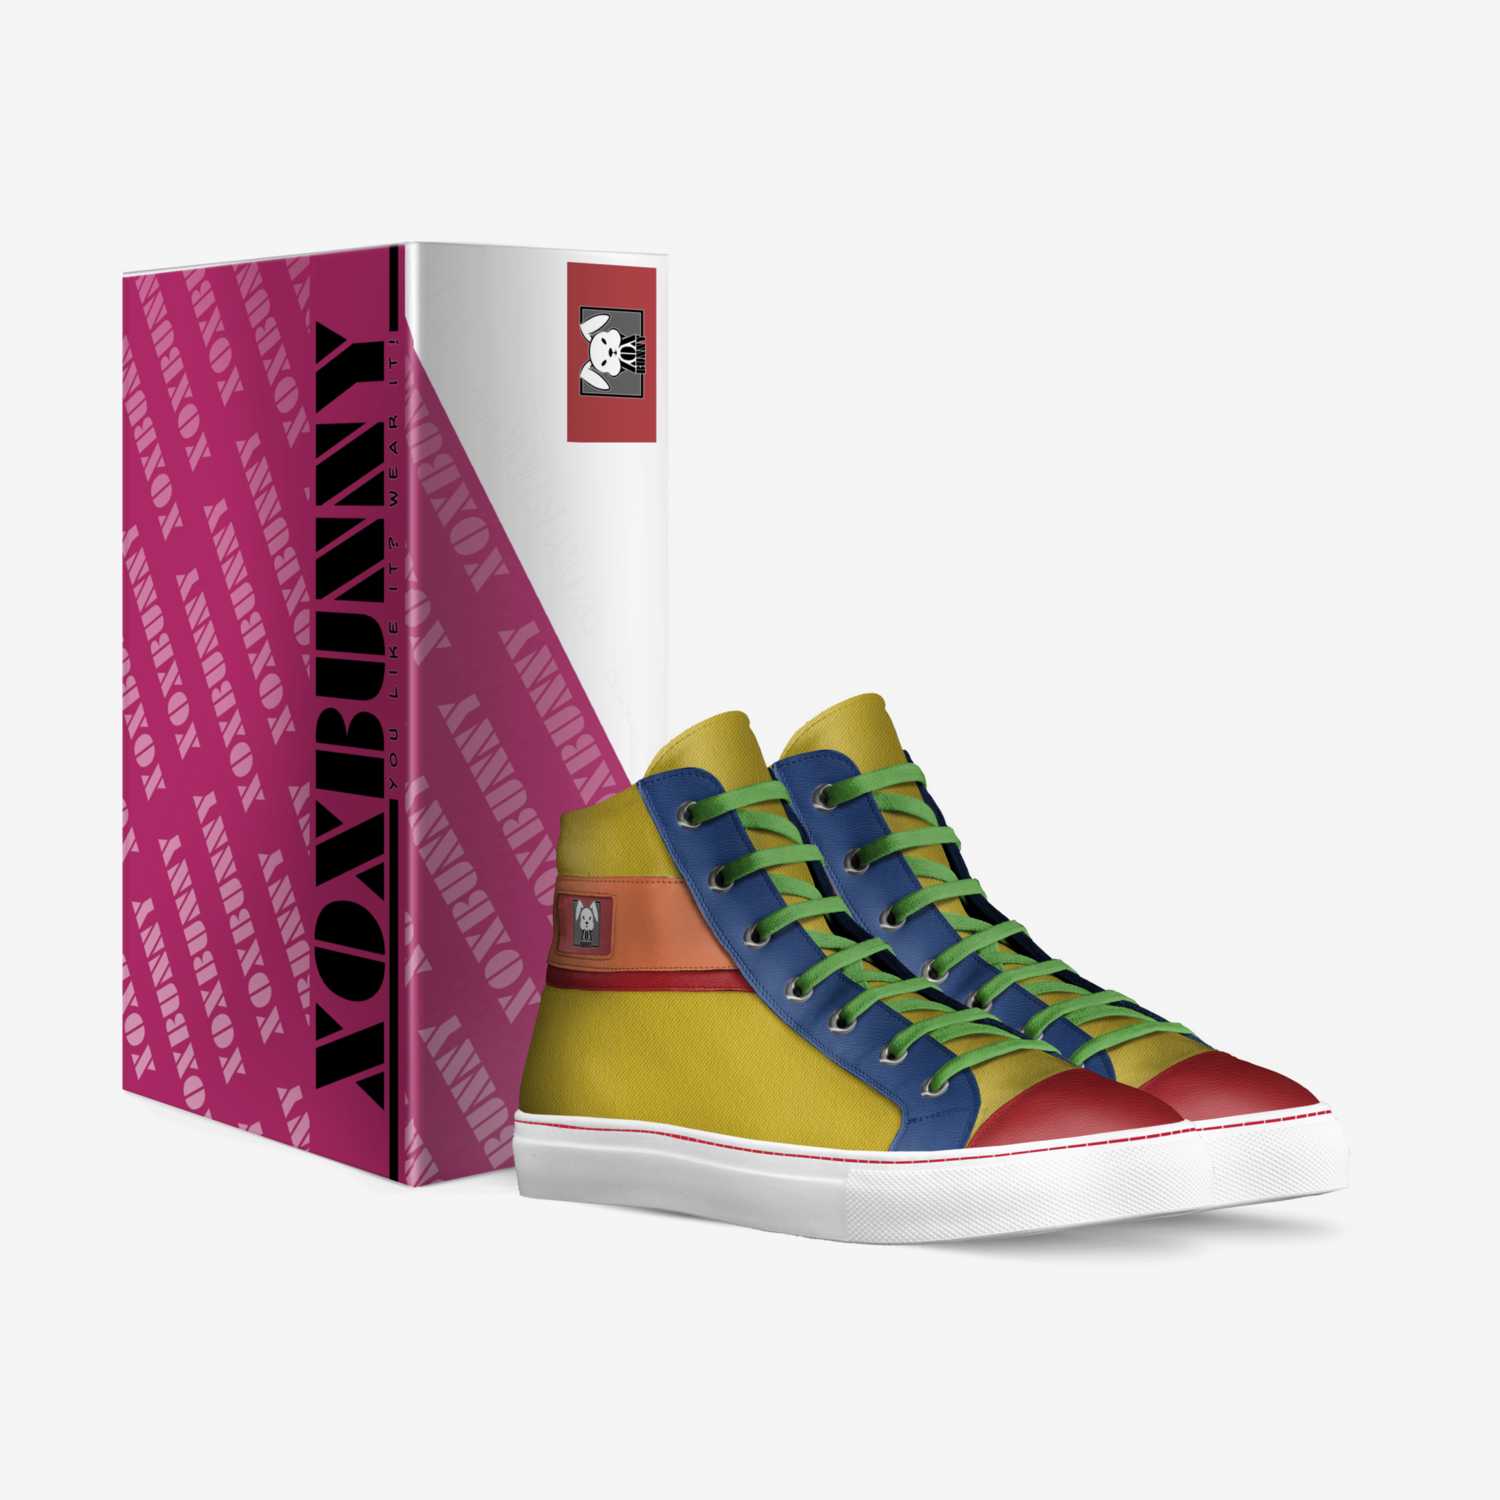 XOXBUNNY custom made in Italy shoes by Roderic Rodriguez | Box view